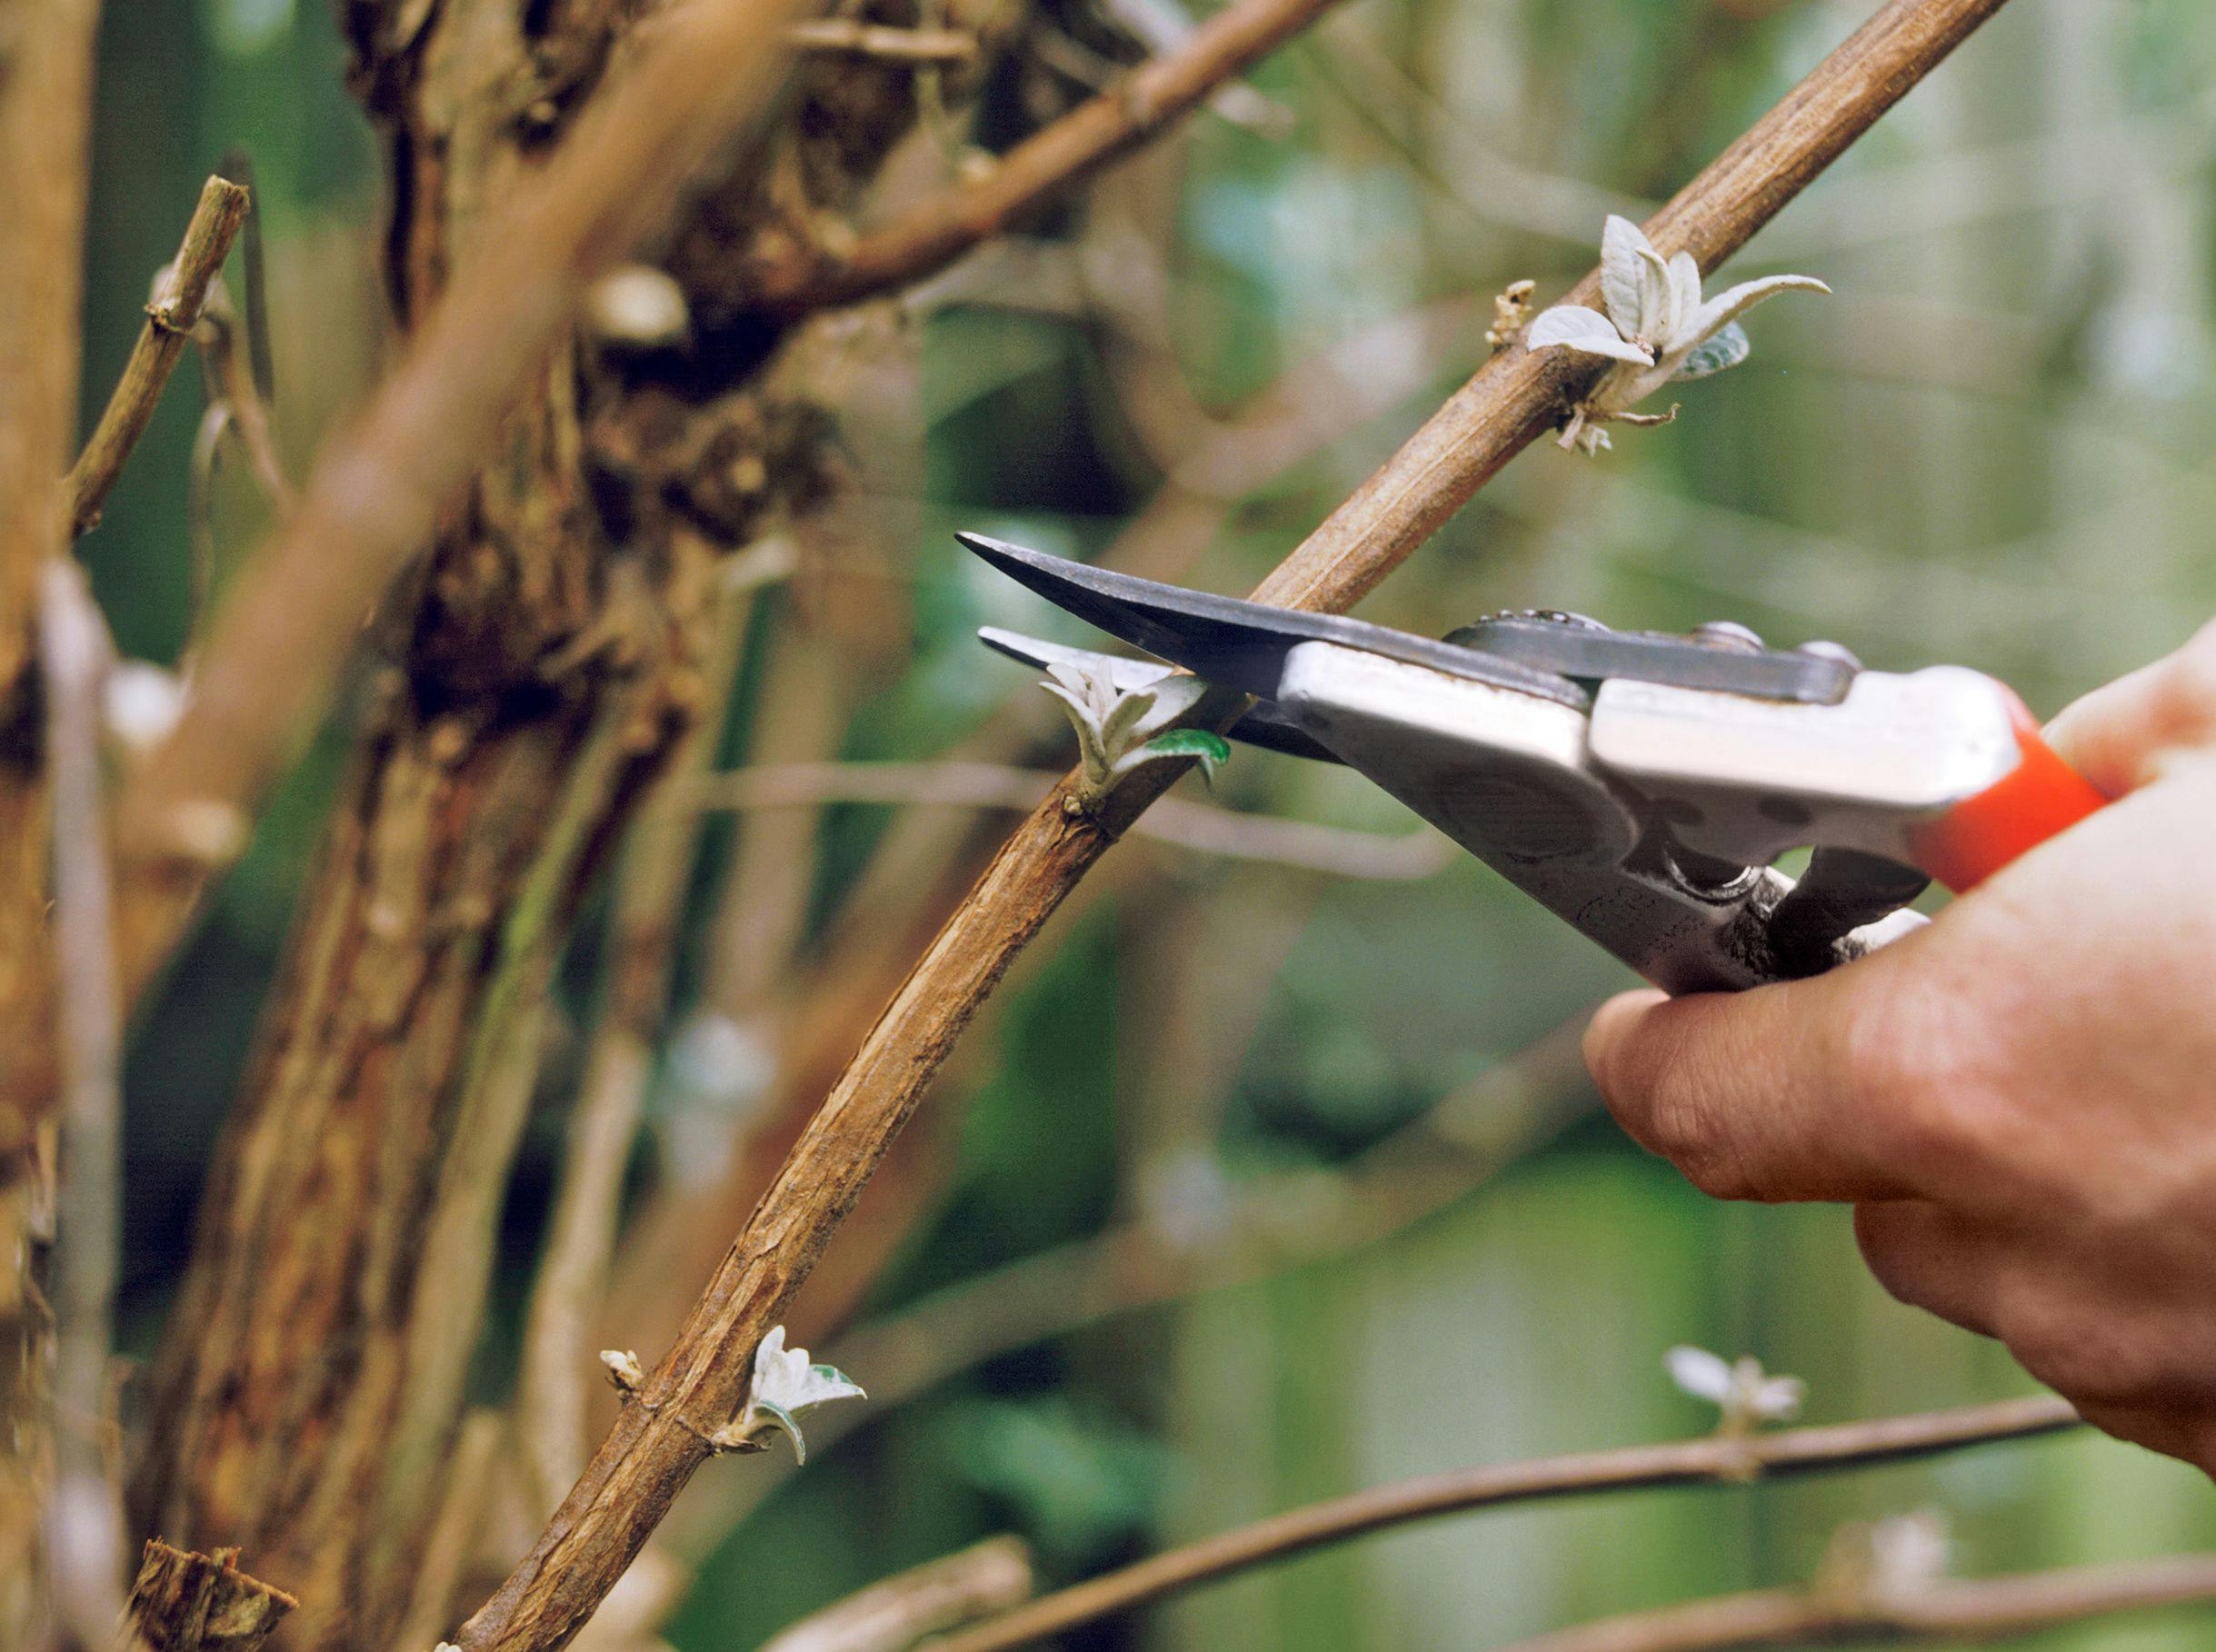 Cover Image for Pruning: The Dos and Don'ts